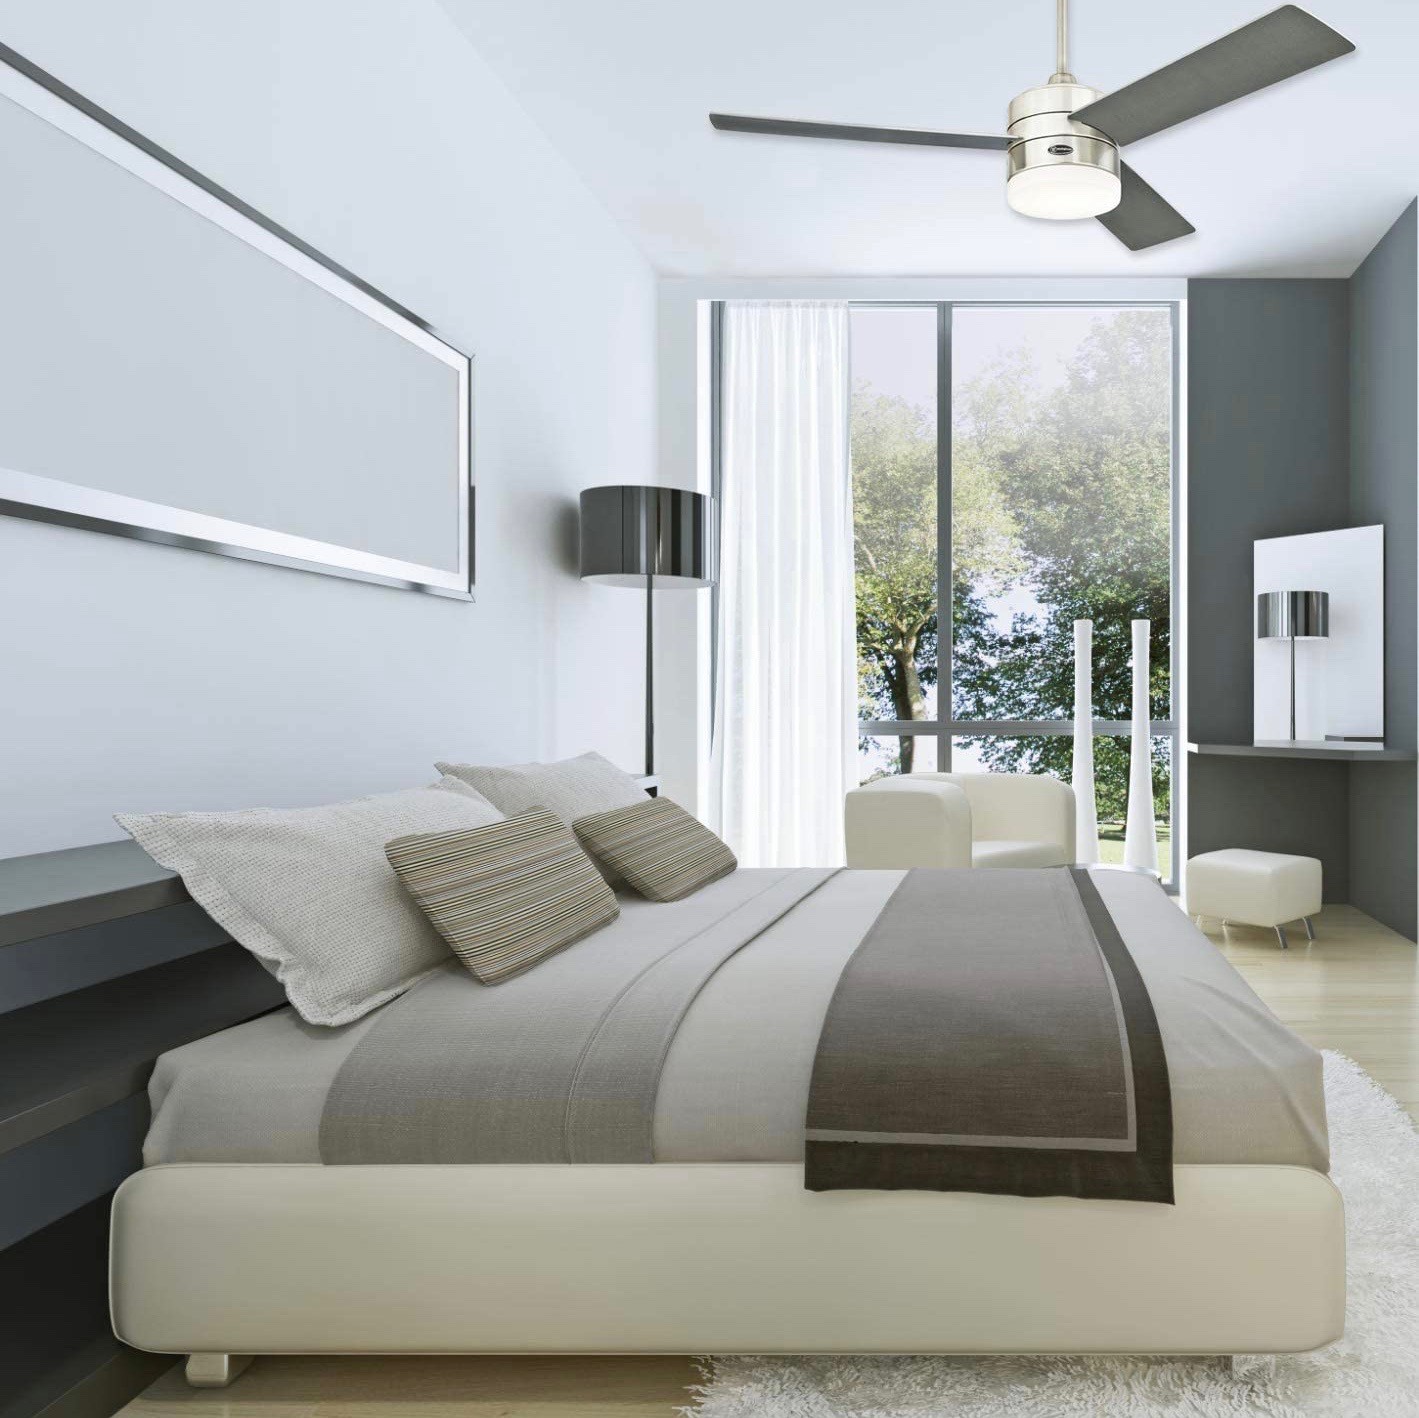 229,95 € Free Shipping | Ceiling fan with light 17W 122×122 cm. 3 vanes-blades Stainless steel and metal casting. Silver Color